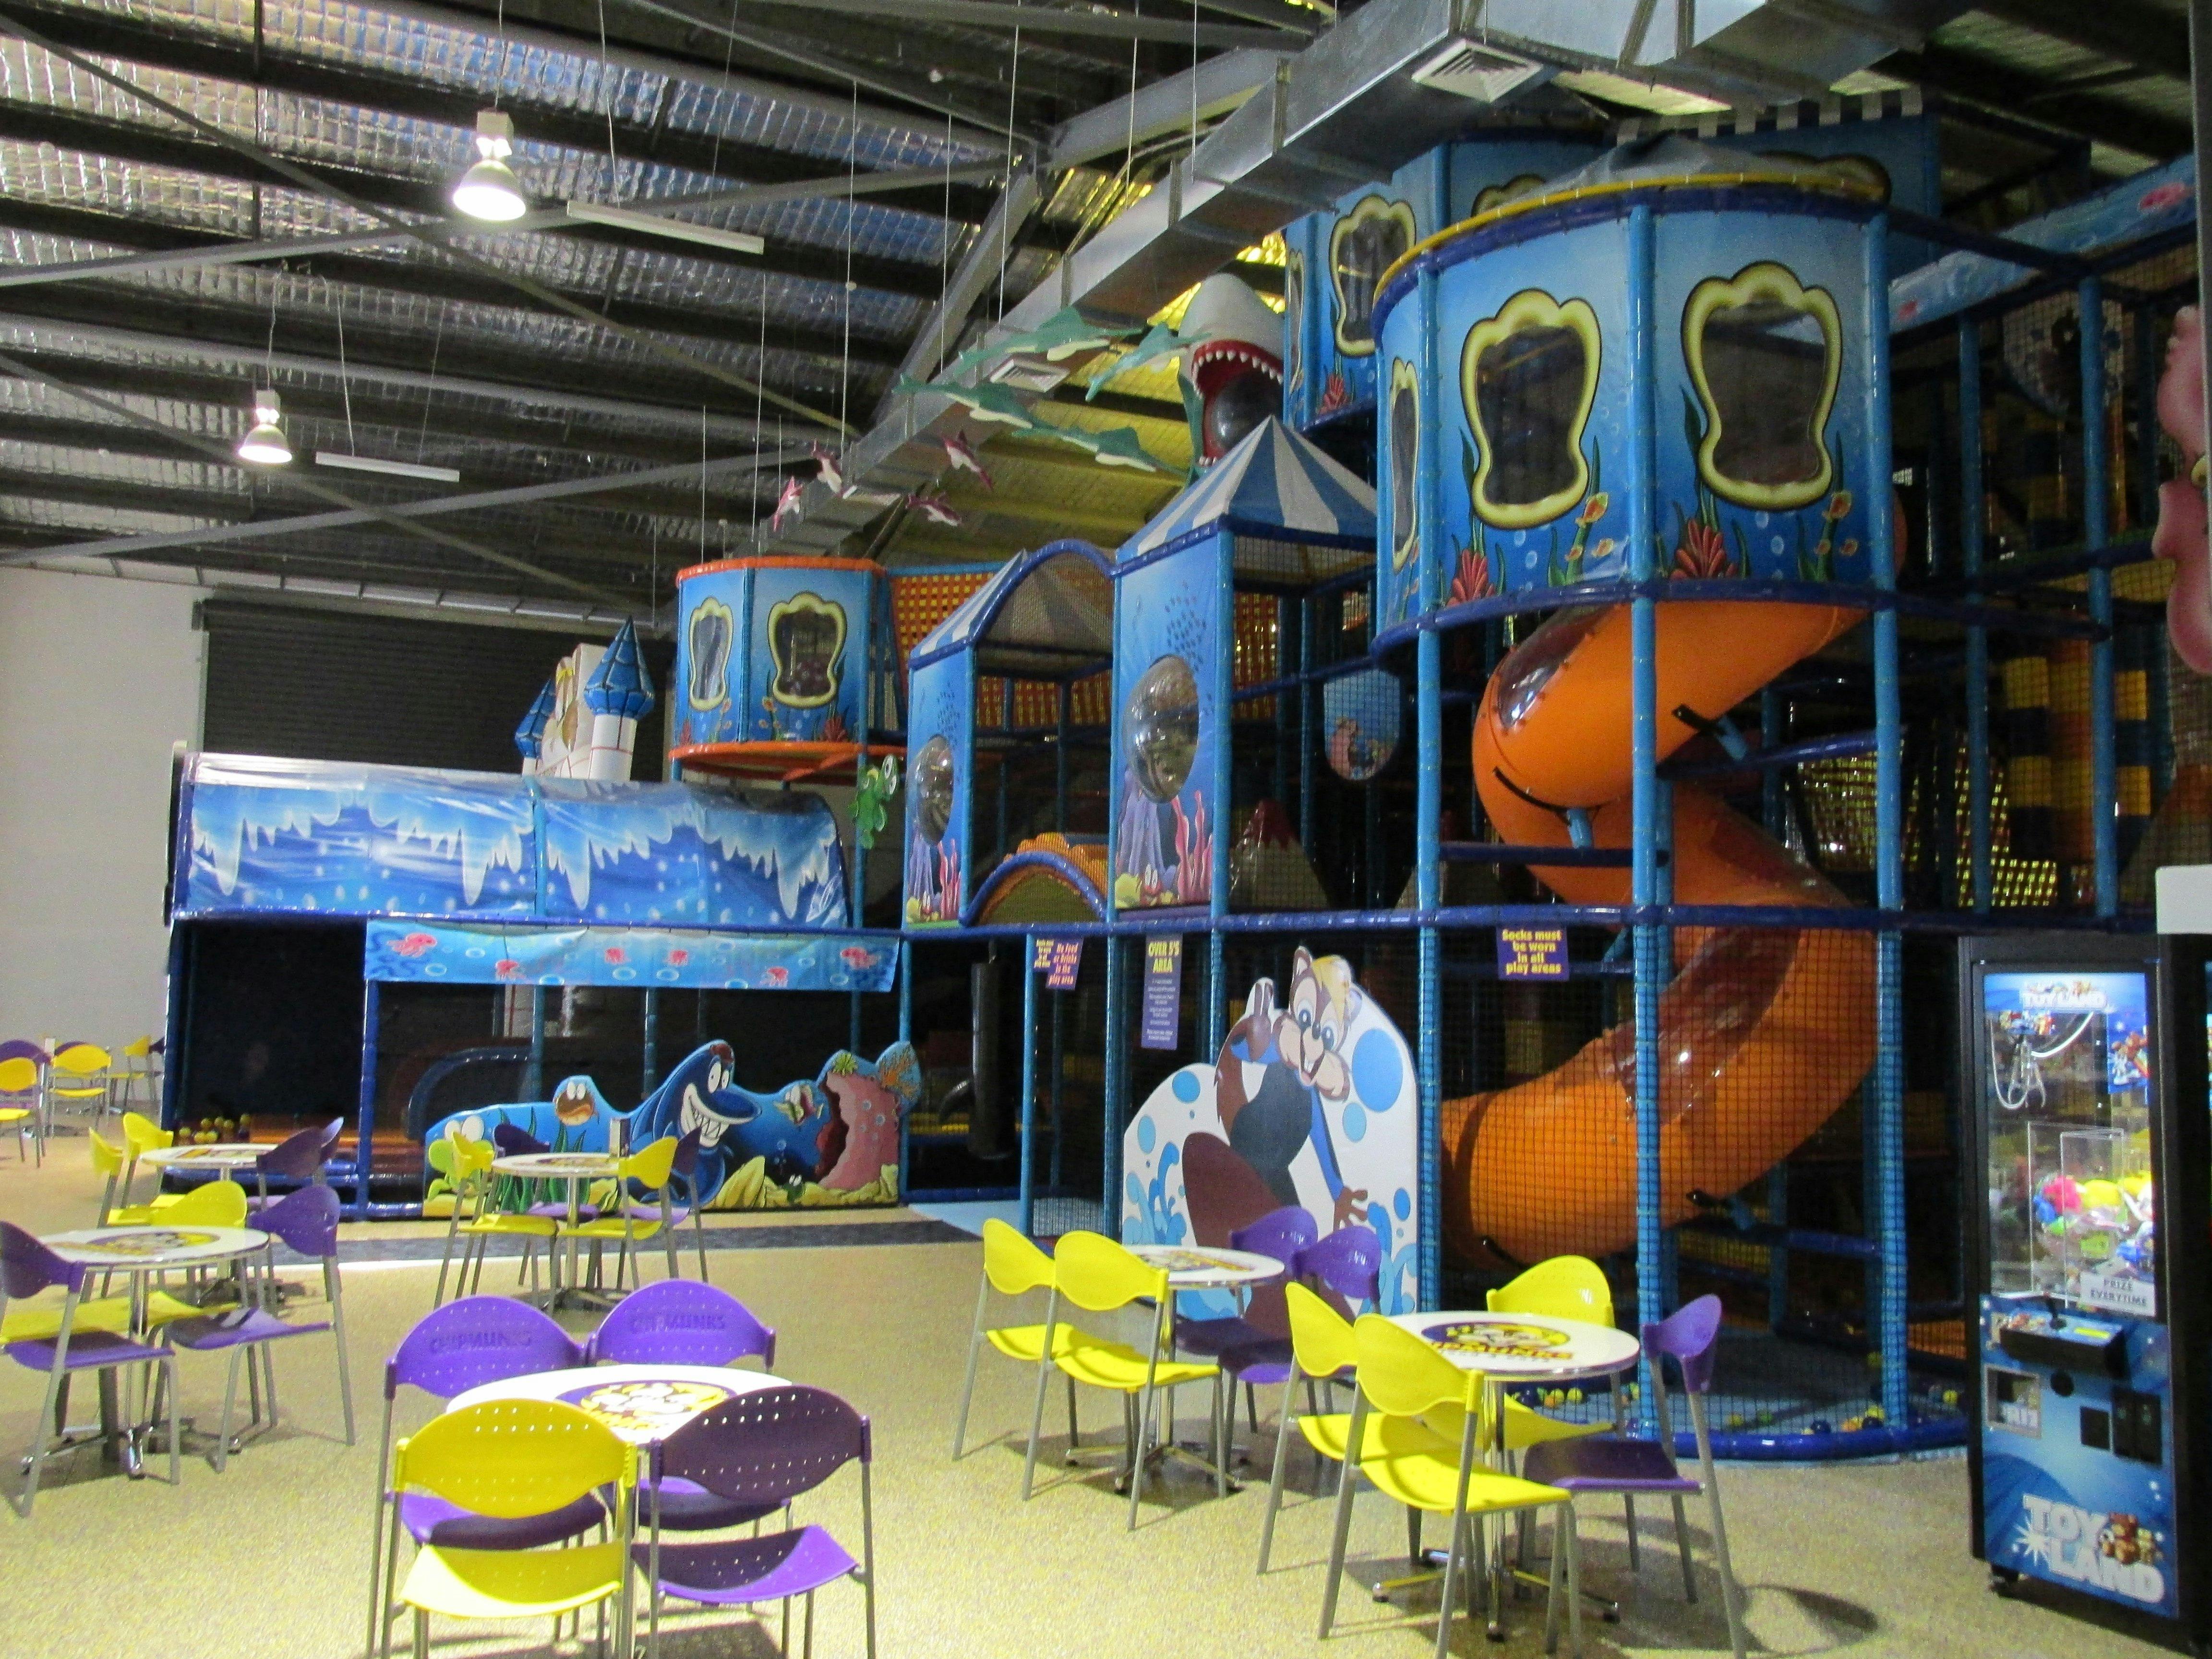 Chipmunks Playland and Cafe: Macquarie Park